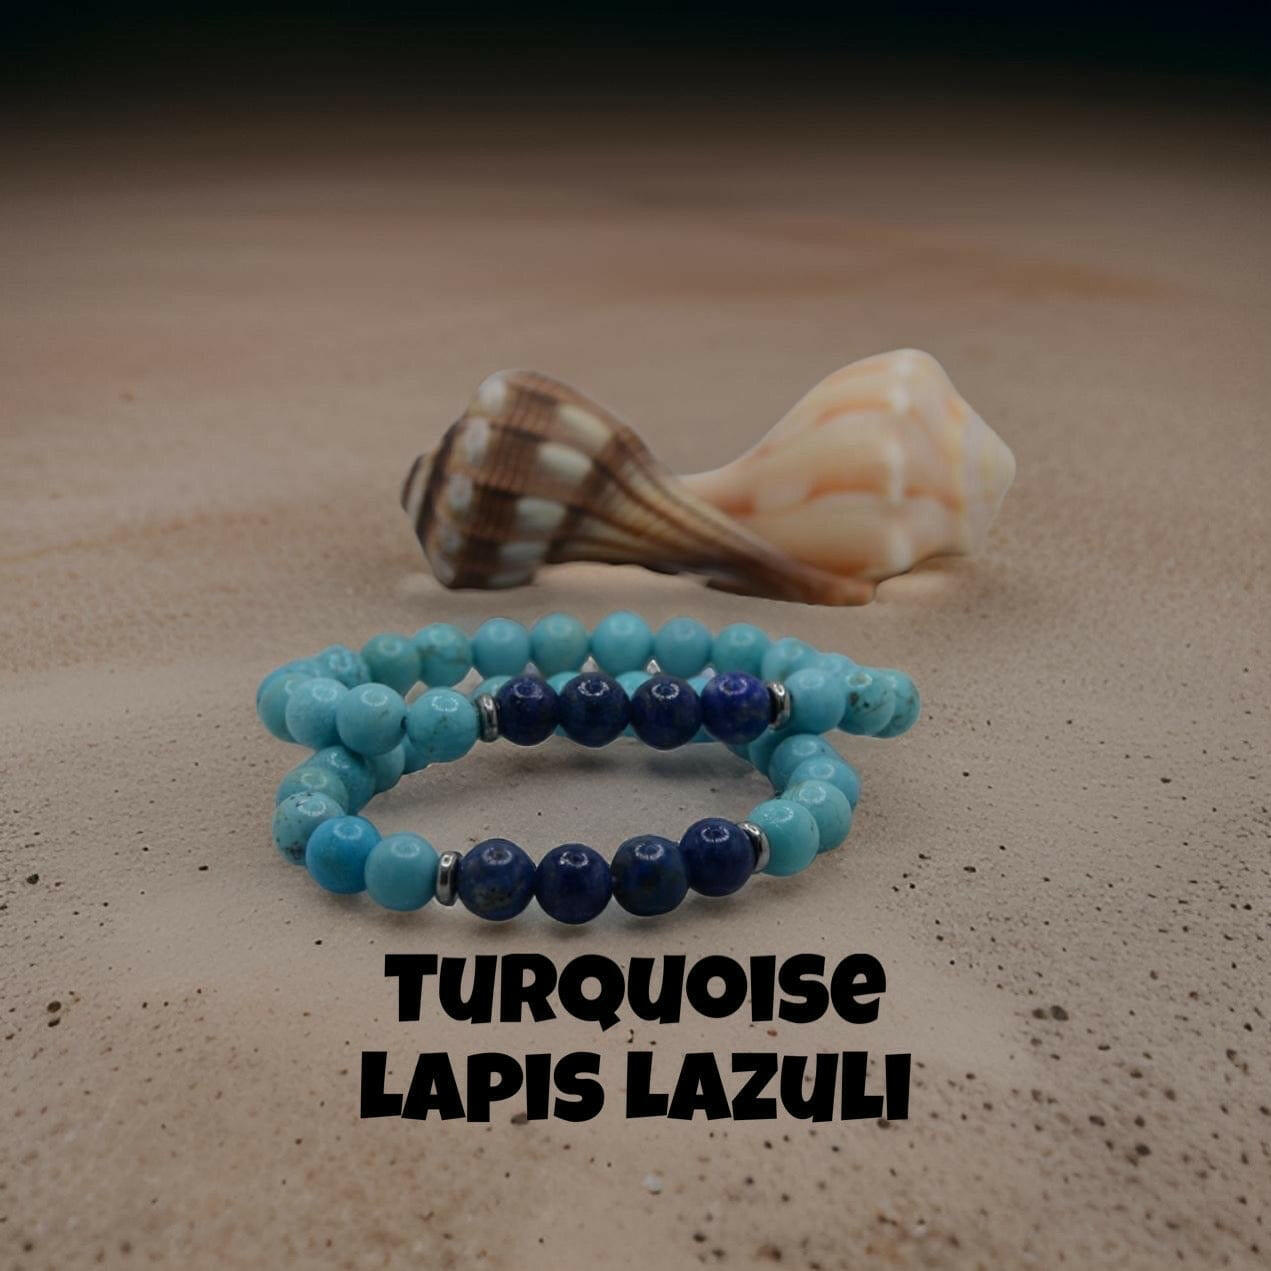 Turquoise and Lapis Lazuli gemstones, high-quality mineral specimens for jewelry making